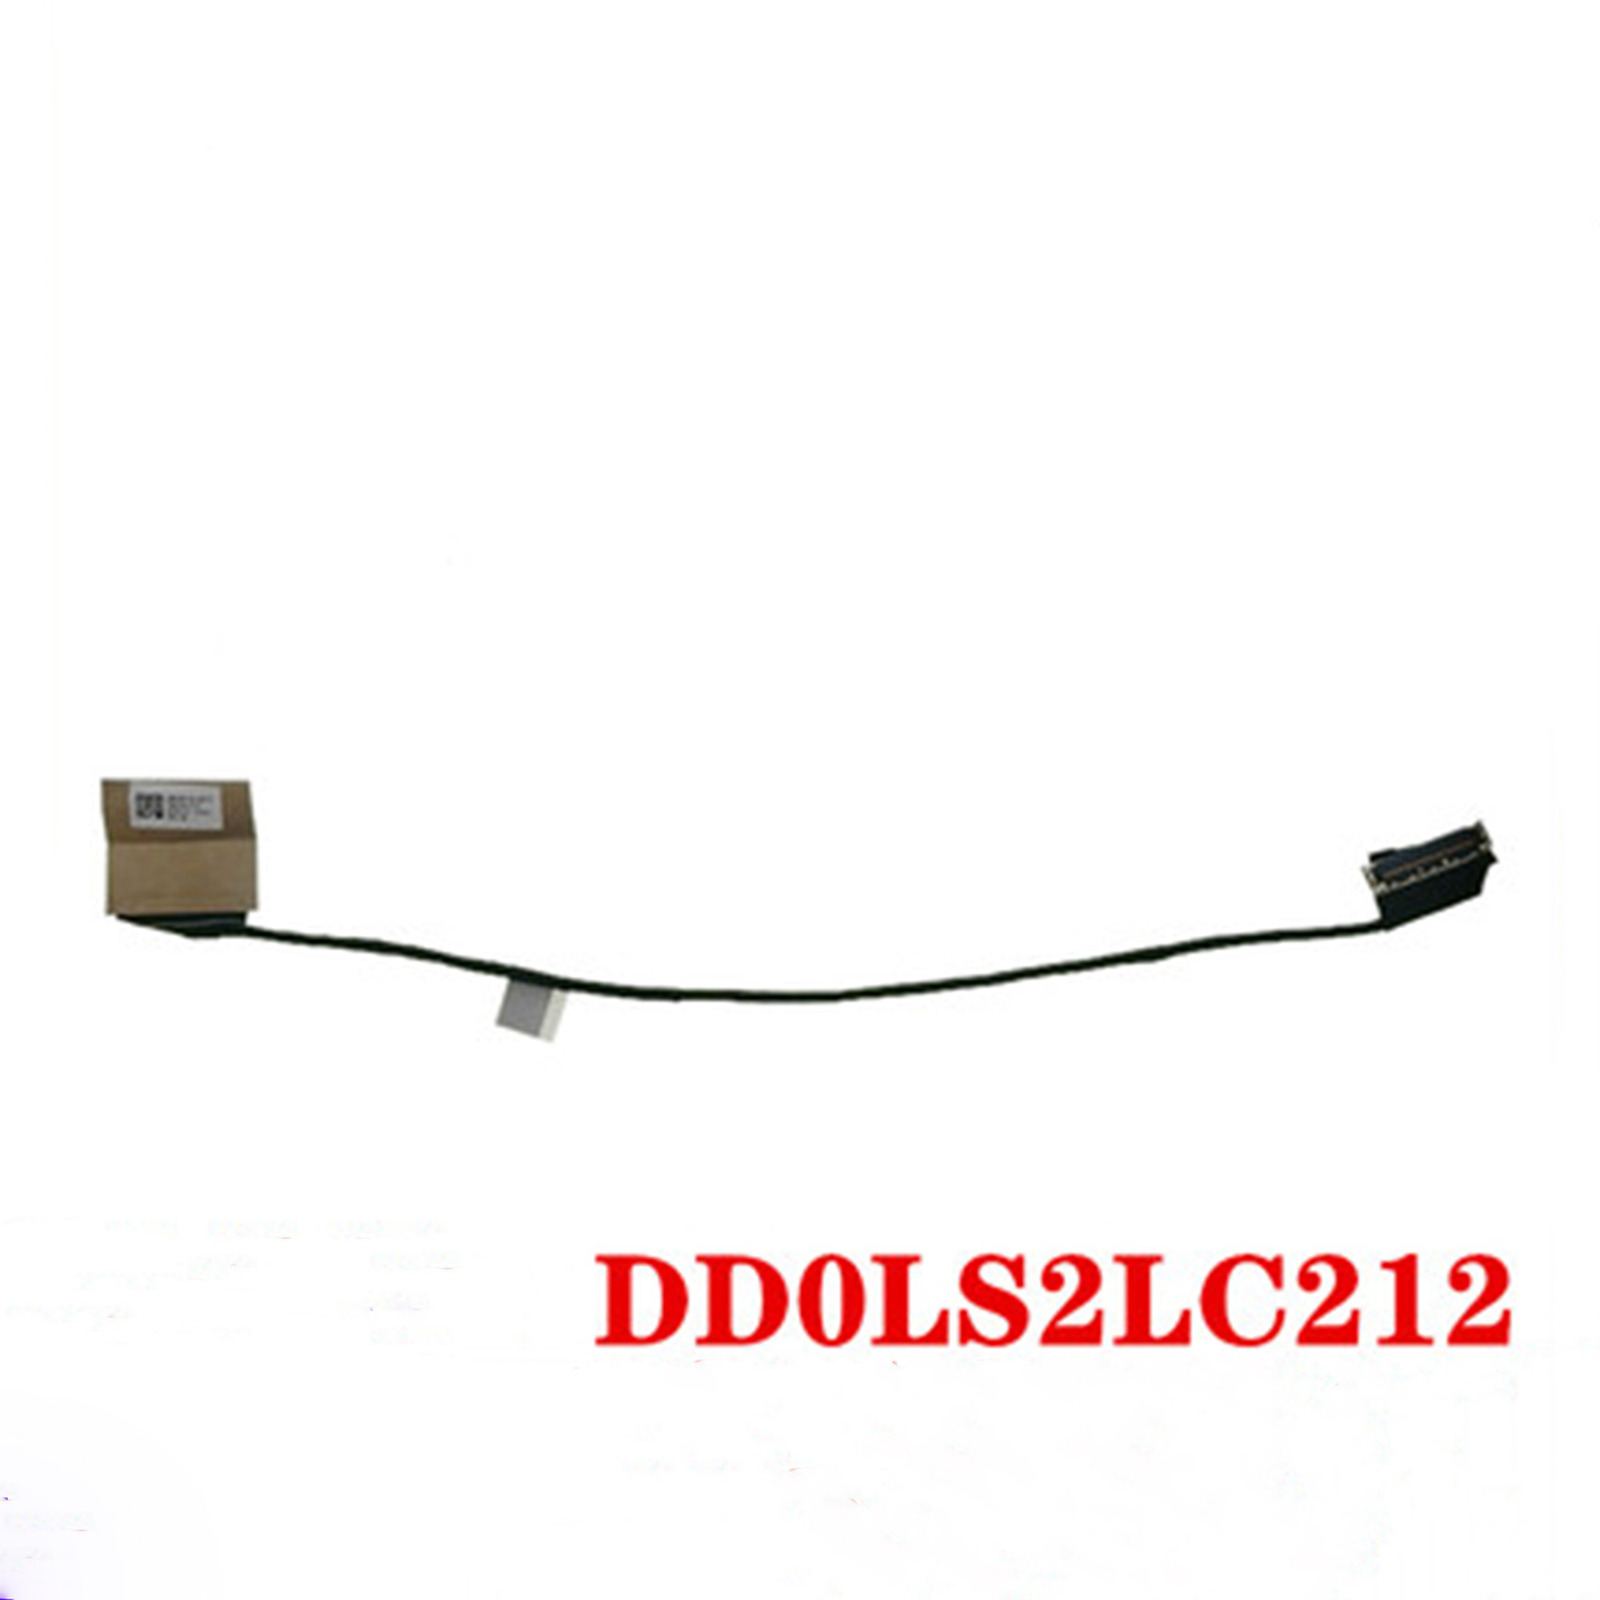 1pc Screen Cable for DD0LS2LC212